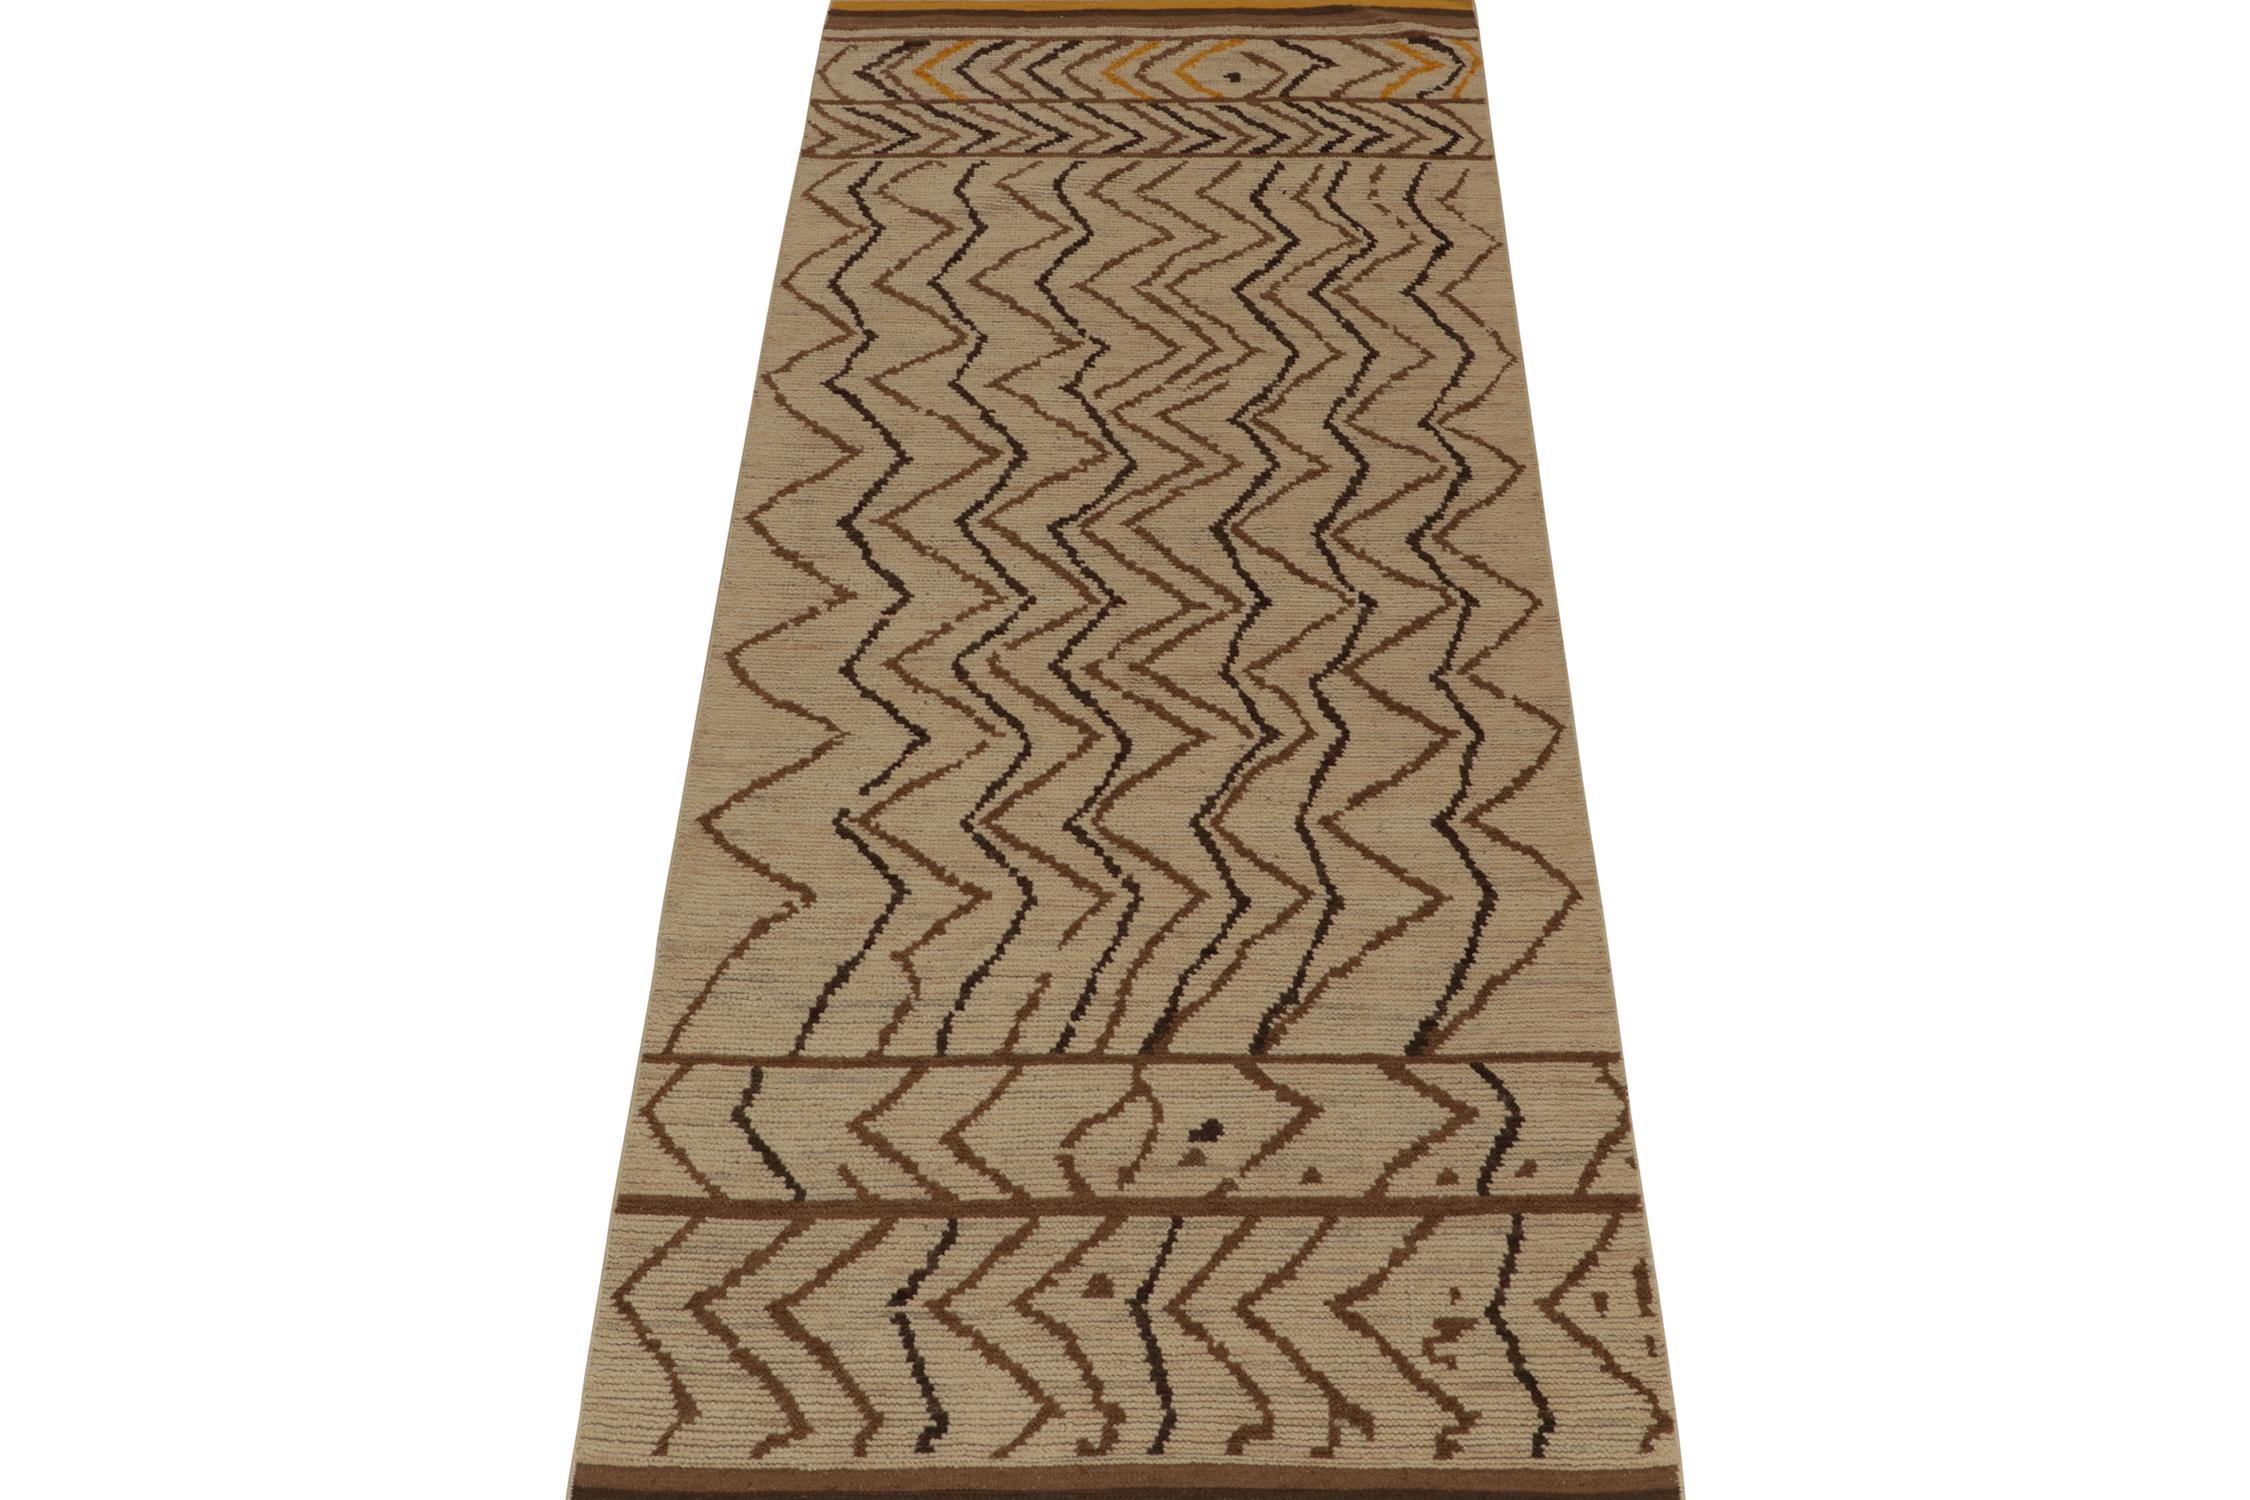 Tribal Rug & Kilim’s Moroccan Style Rug in Beige-Brown Chevrons with Gold Accents For Sale